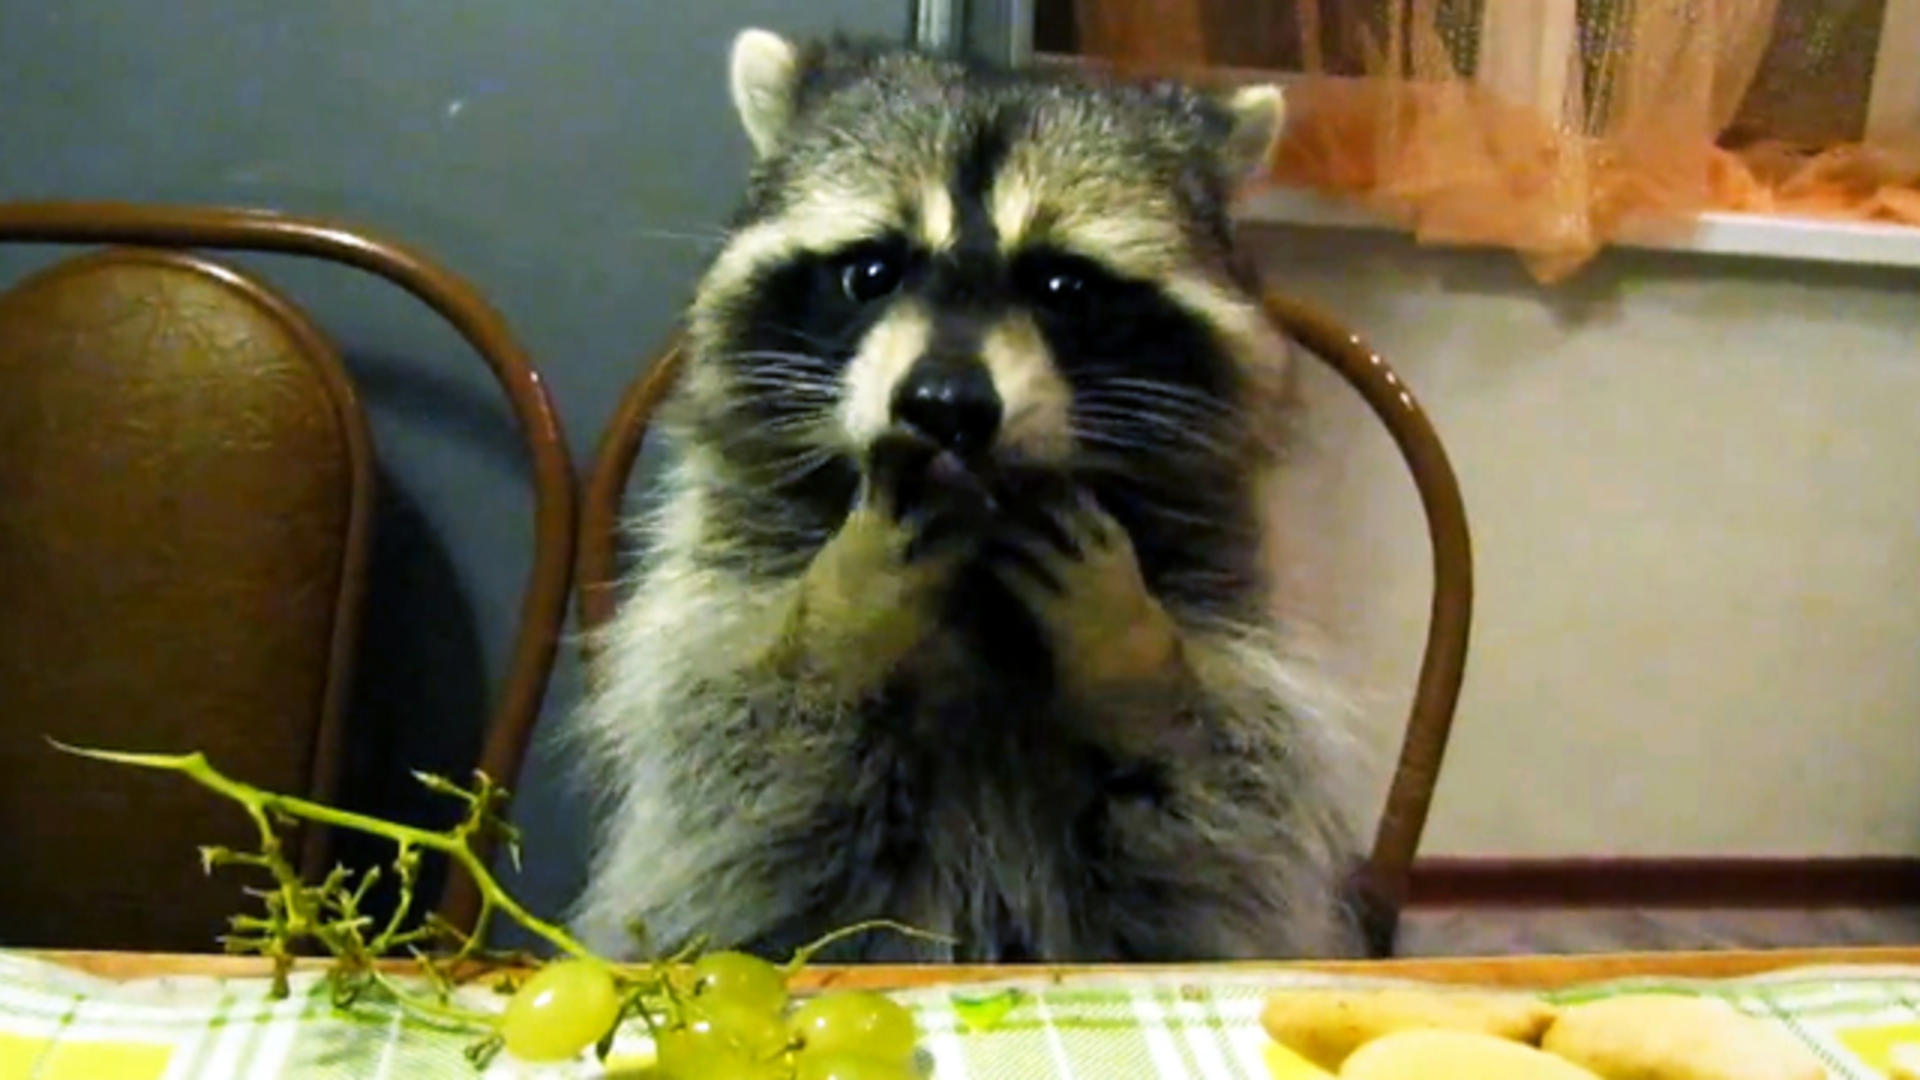 Raccoon sits up at dinner table, eats grapes - CBS News